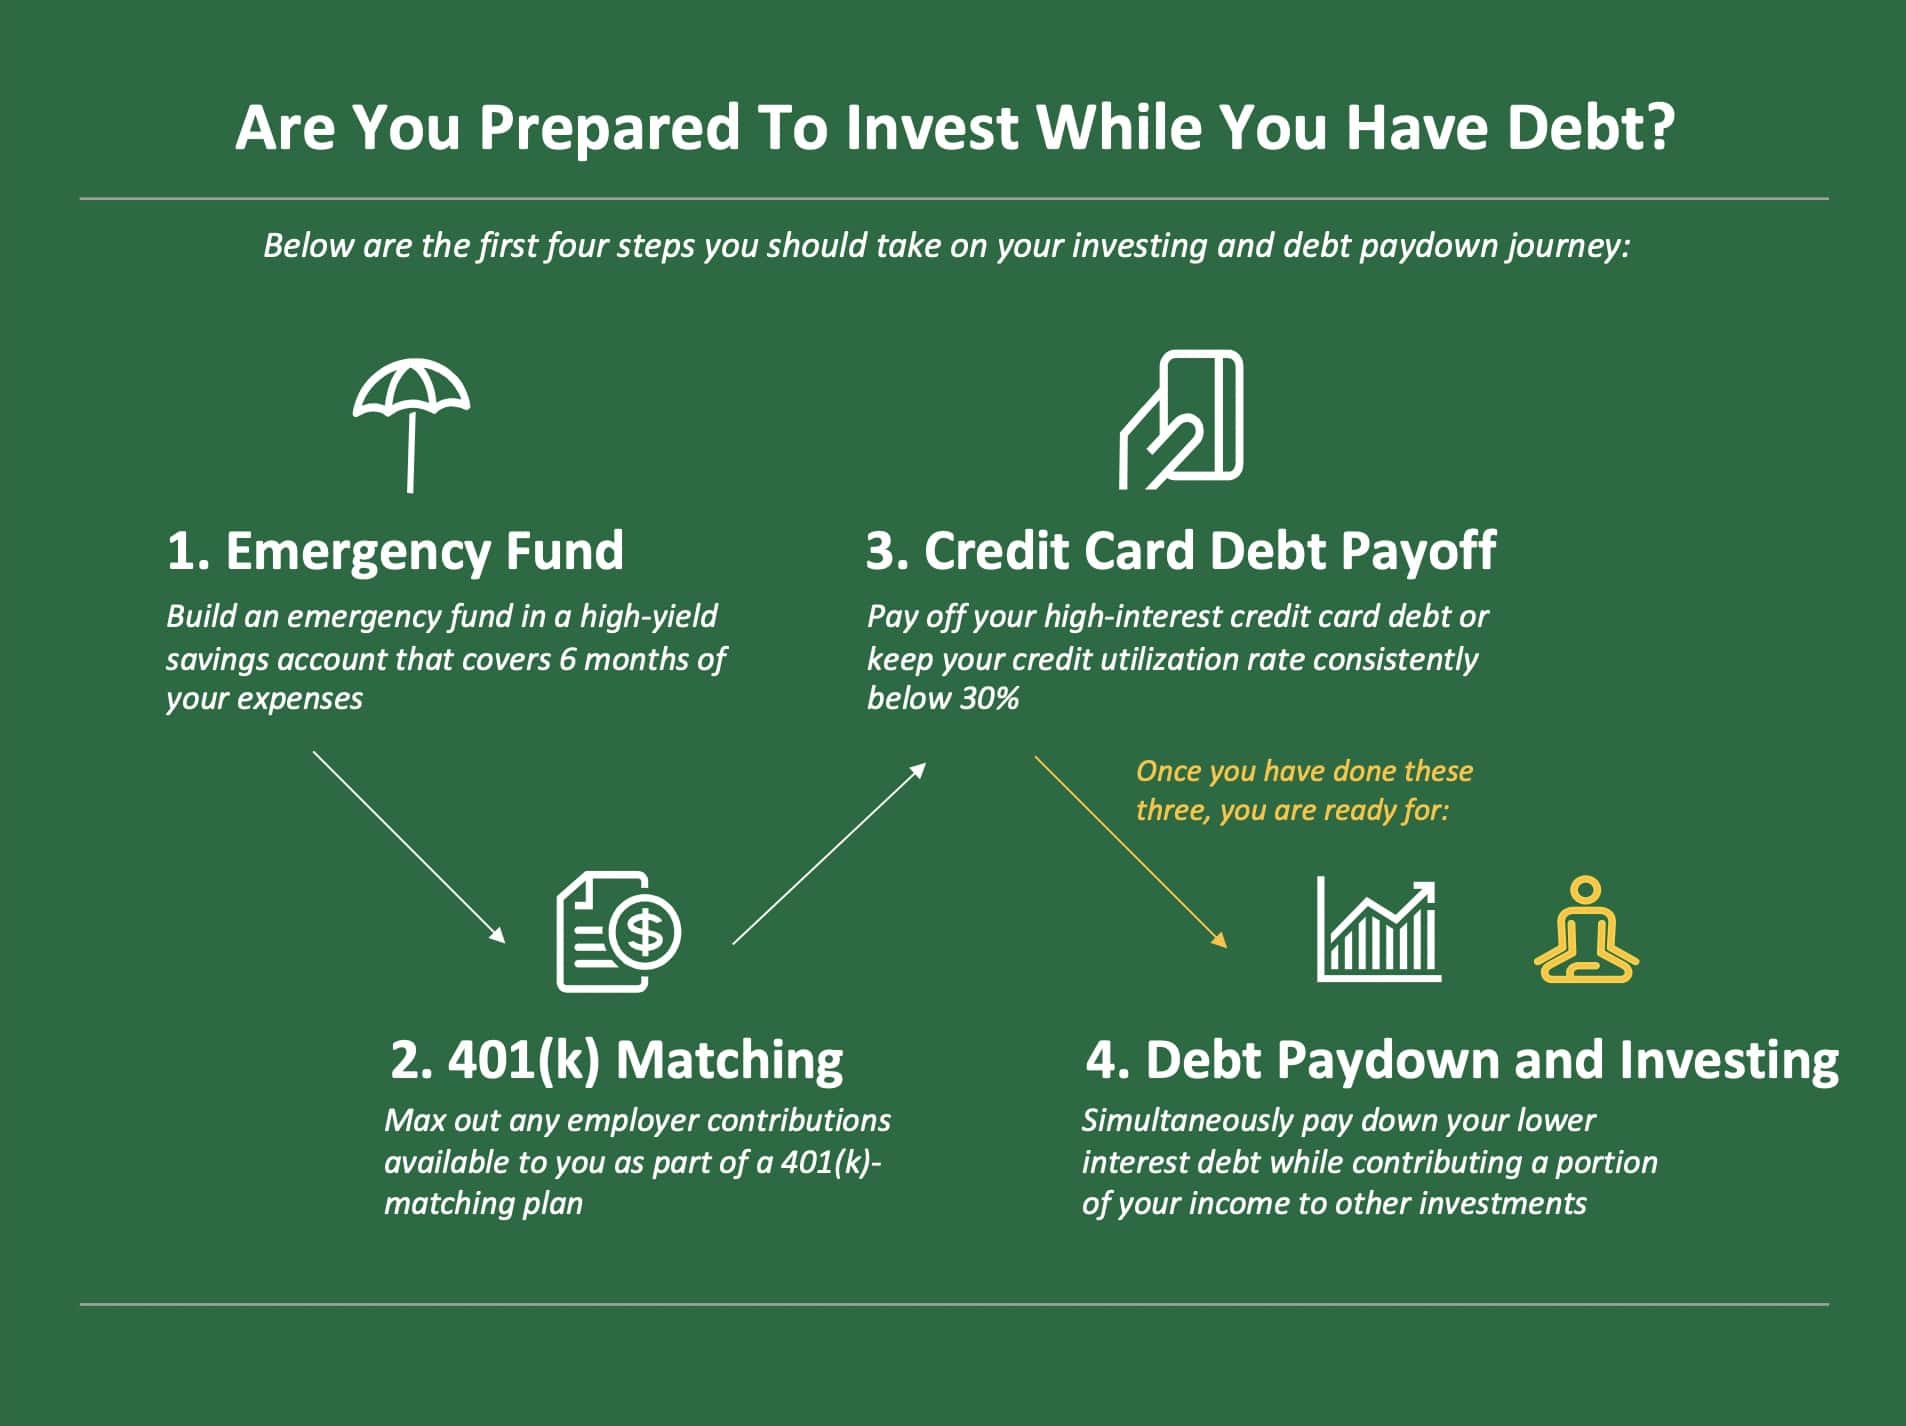 How To Choose Between Paying Down Debt and Investing